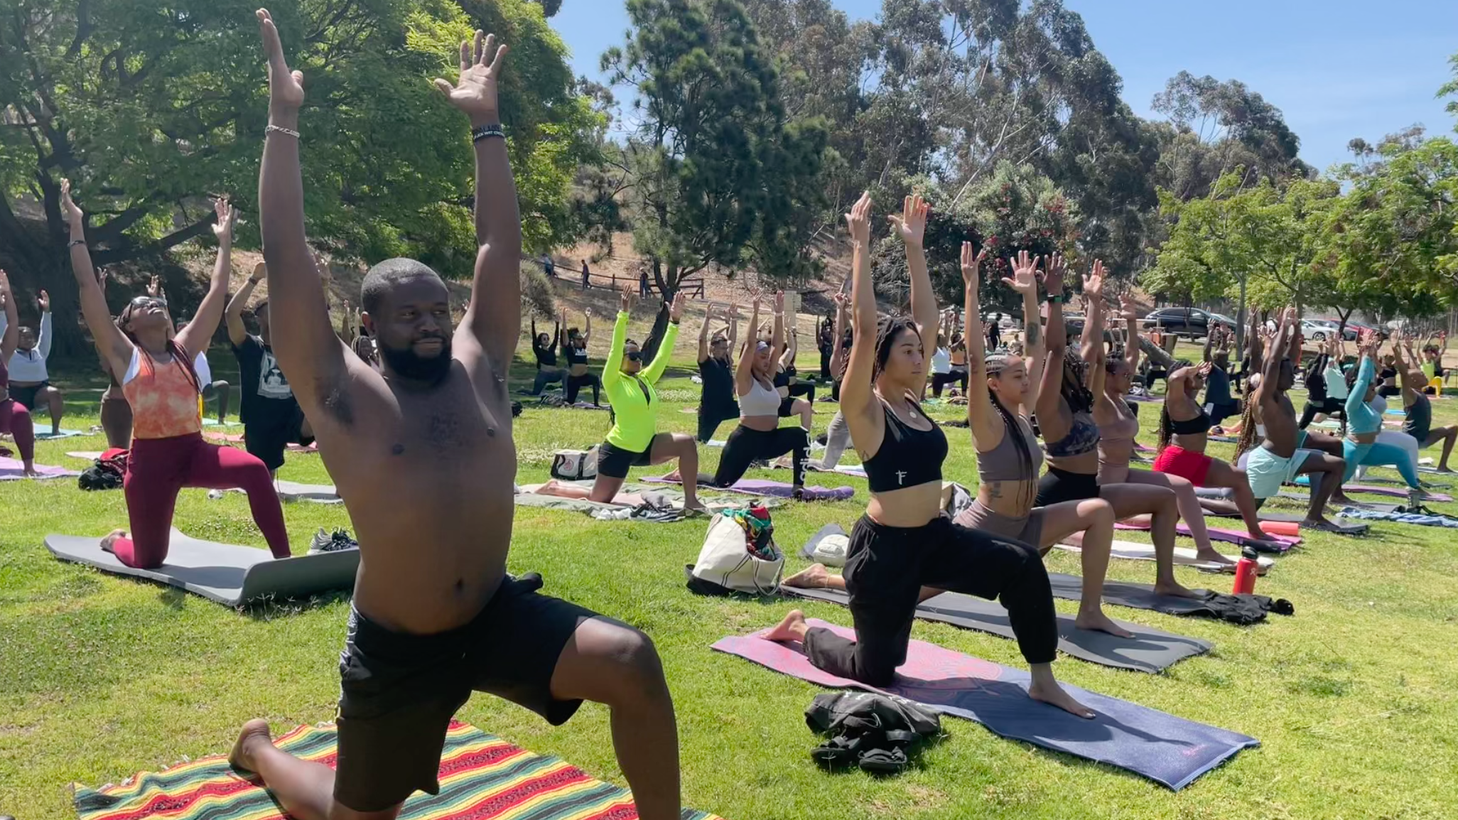 enny Gaiter (left) started coming to WalkGood LA yoga classes when they started two years ago, after he learned it was part of a local racial equity movement. The free classes attract hundreds to Kenneth Hahn State Park each week.